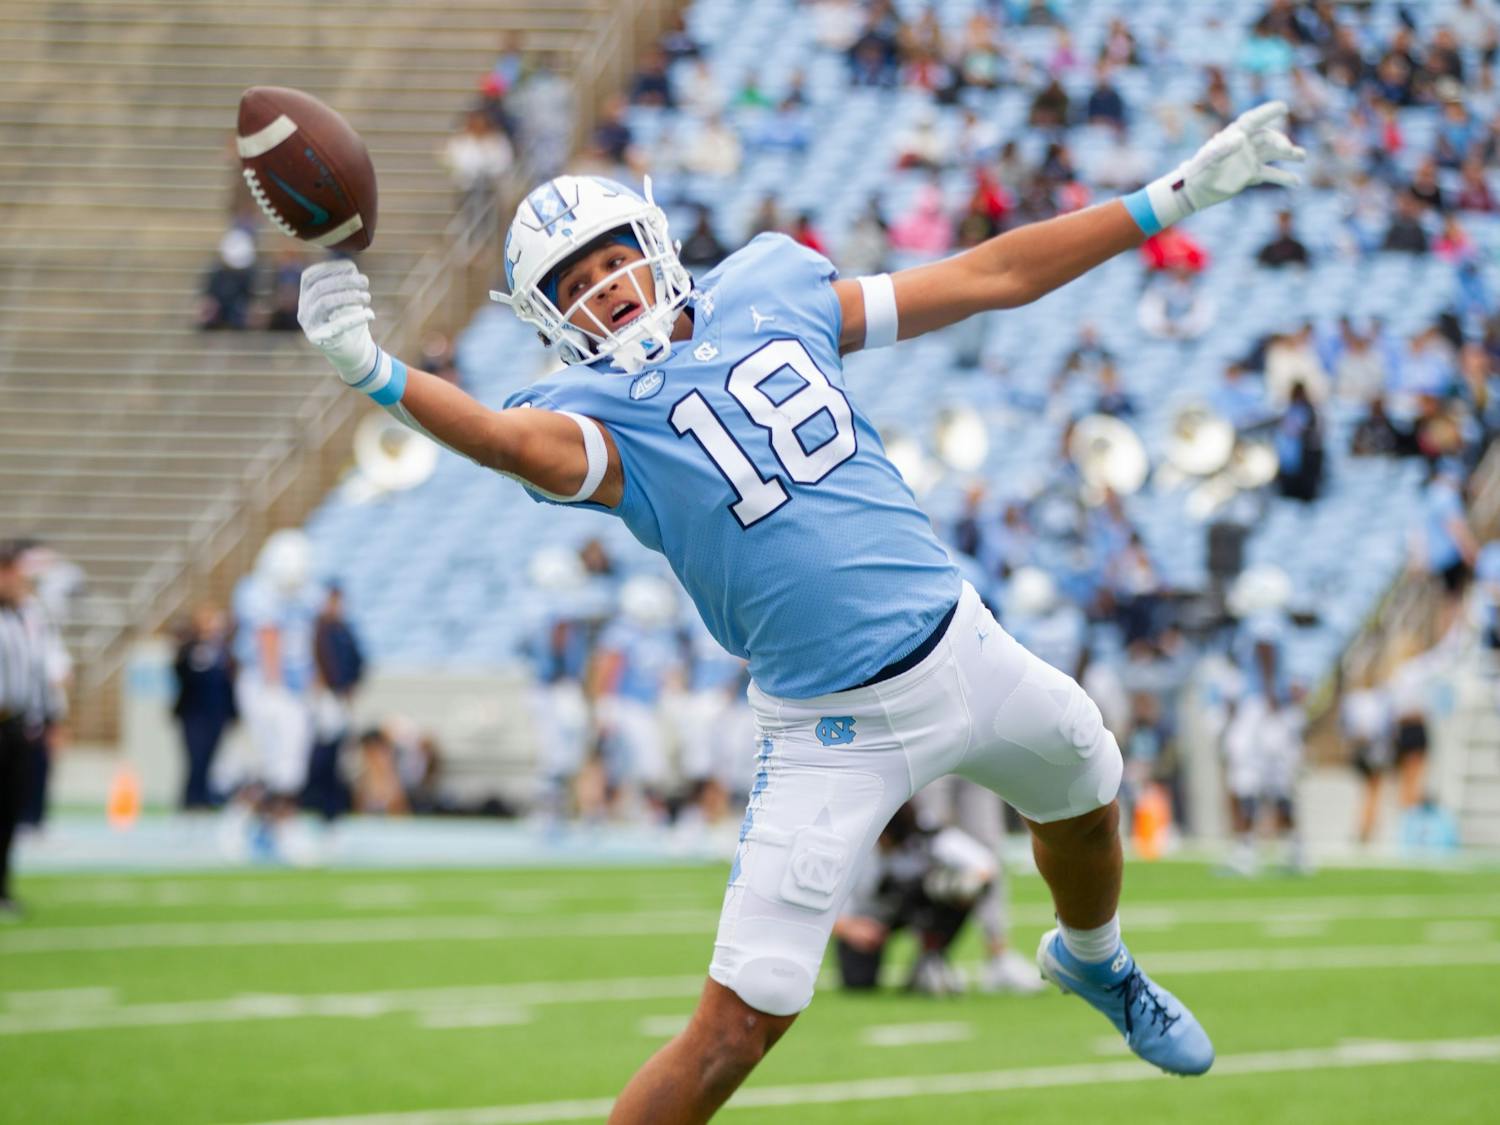 Sophomore tight end Bryson Nesbit (18) goes for a catch on April 9, 2022, in Chapel Hill, NC, when UNC football held their spring scrimmage.